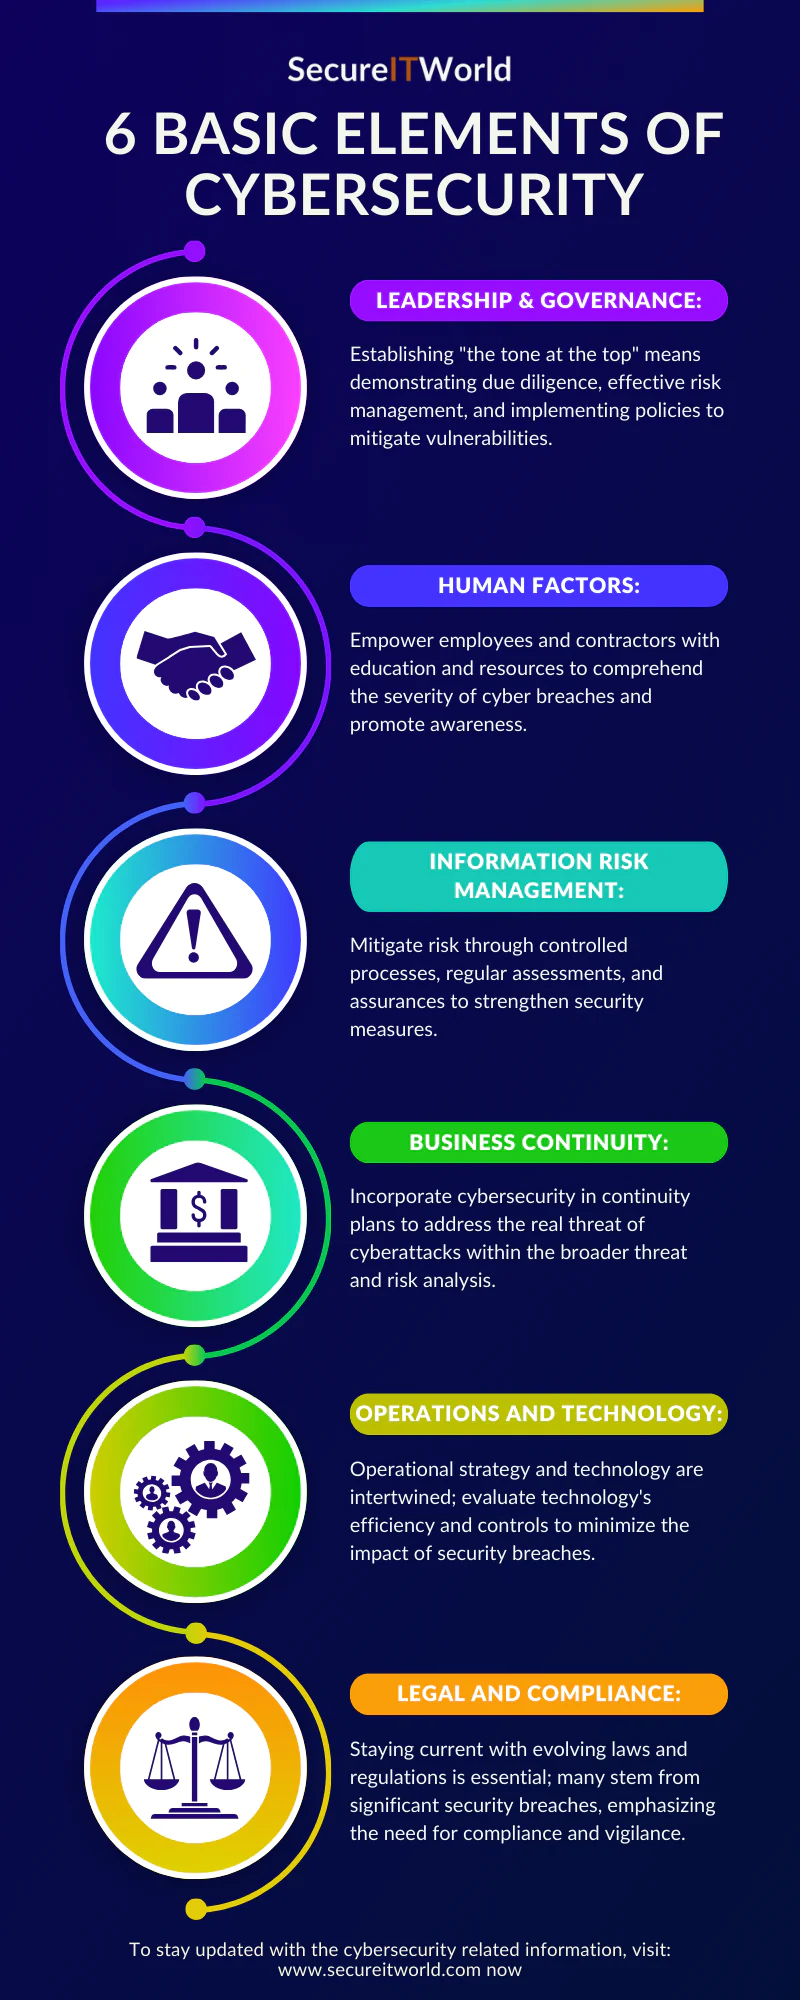 6 Basic Elements of Cybersecurity